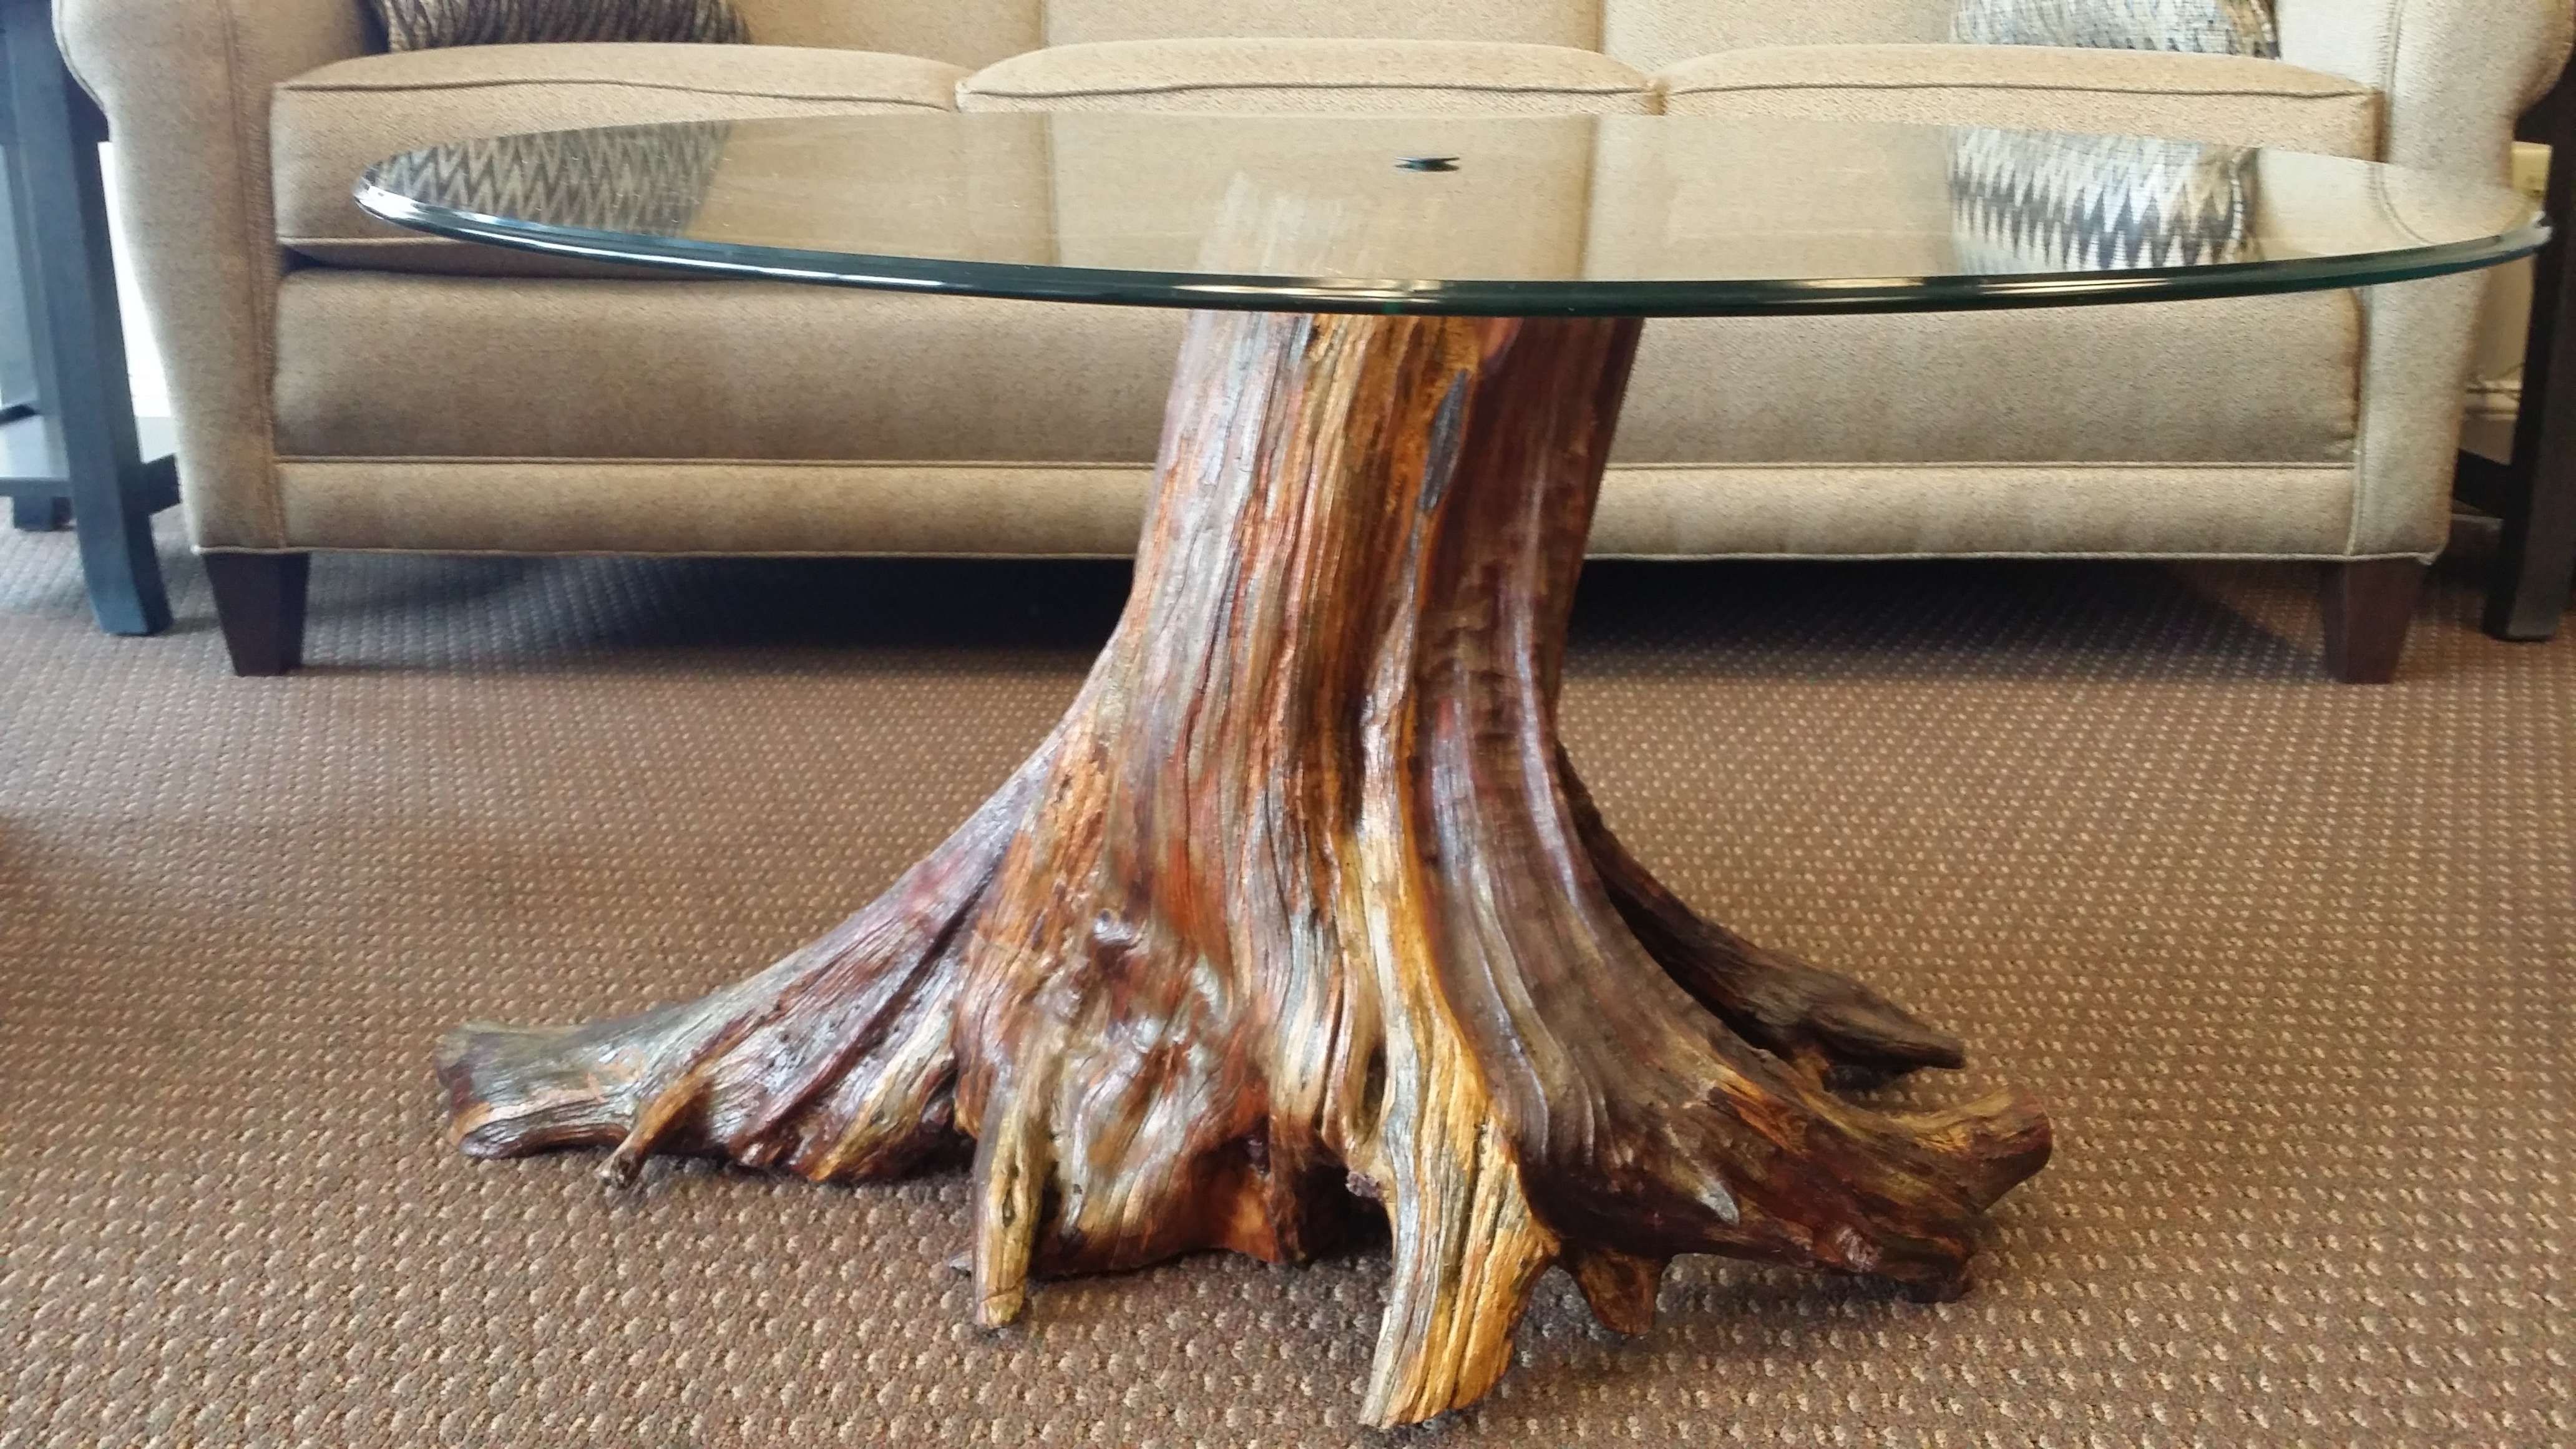 Tree Stump Coffee Table Rustic Trunk Tables Hairpin Legs – Dma Inside Best And Newest Tree Trunk Coffee Table (View 3 of 20)